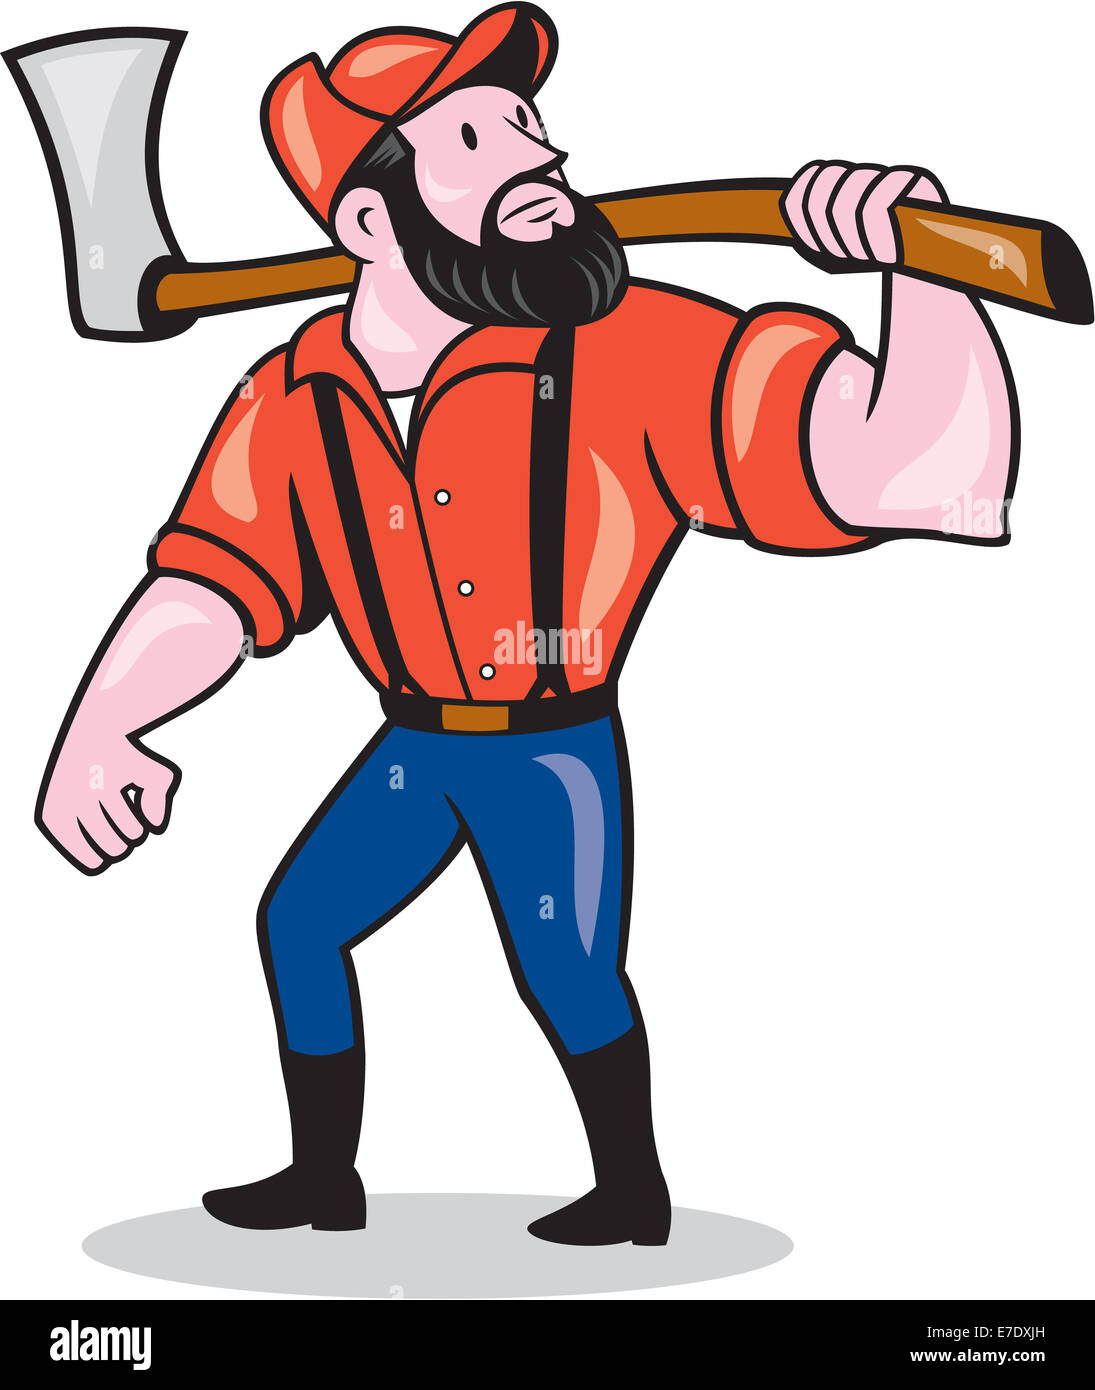 Illustration of a lumberjack sawyer forester standing holding an axe on shoulder looking up to side on isolated white background done in cartoon style. Stock Photo